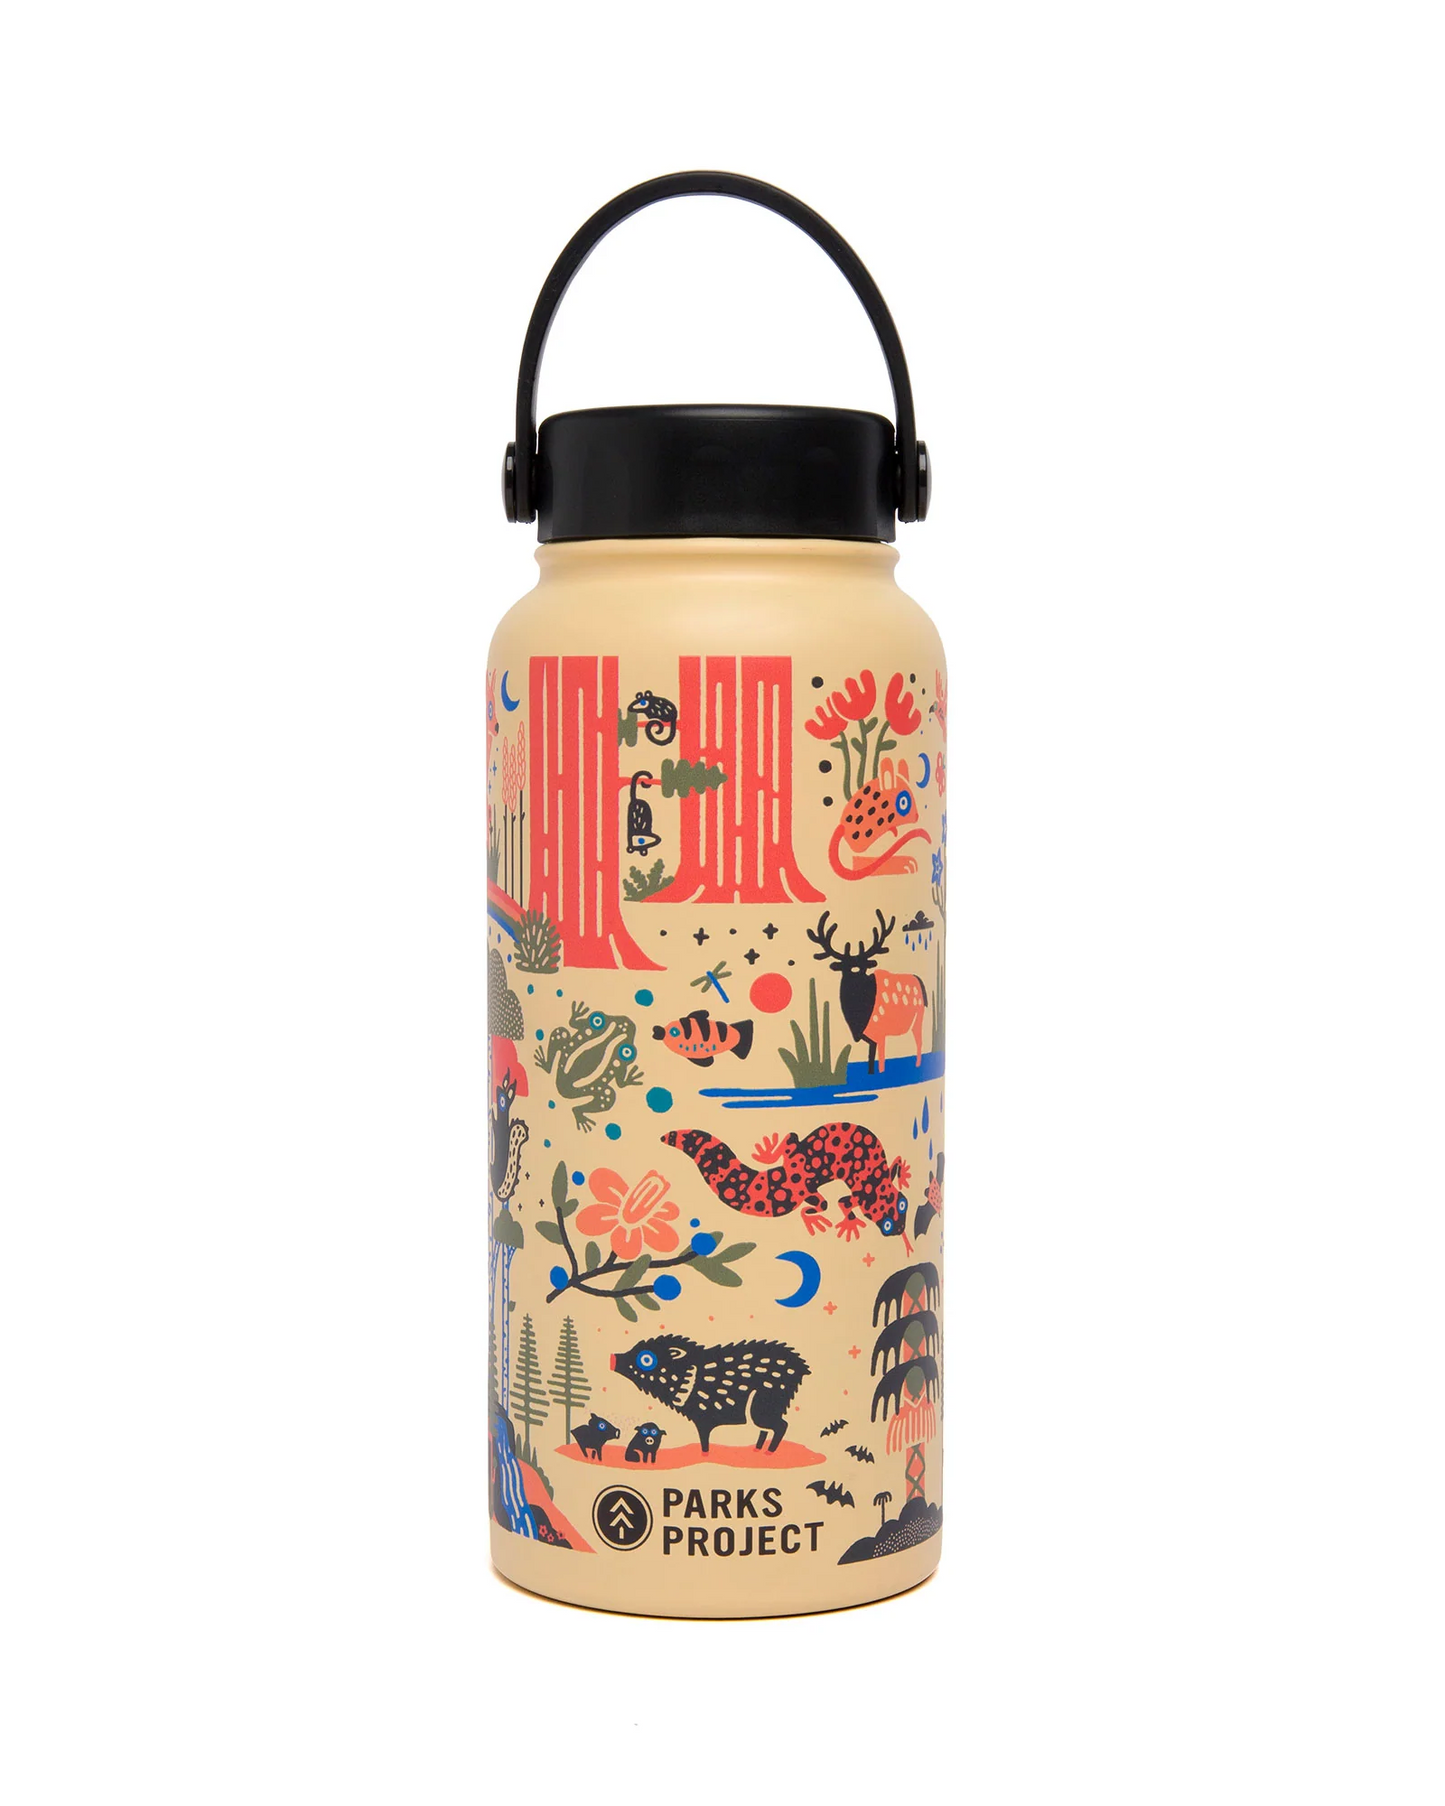 Parks Project National Parks Founded 32oz. Insulated Water Bottle